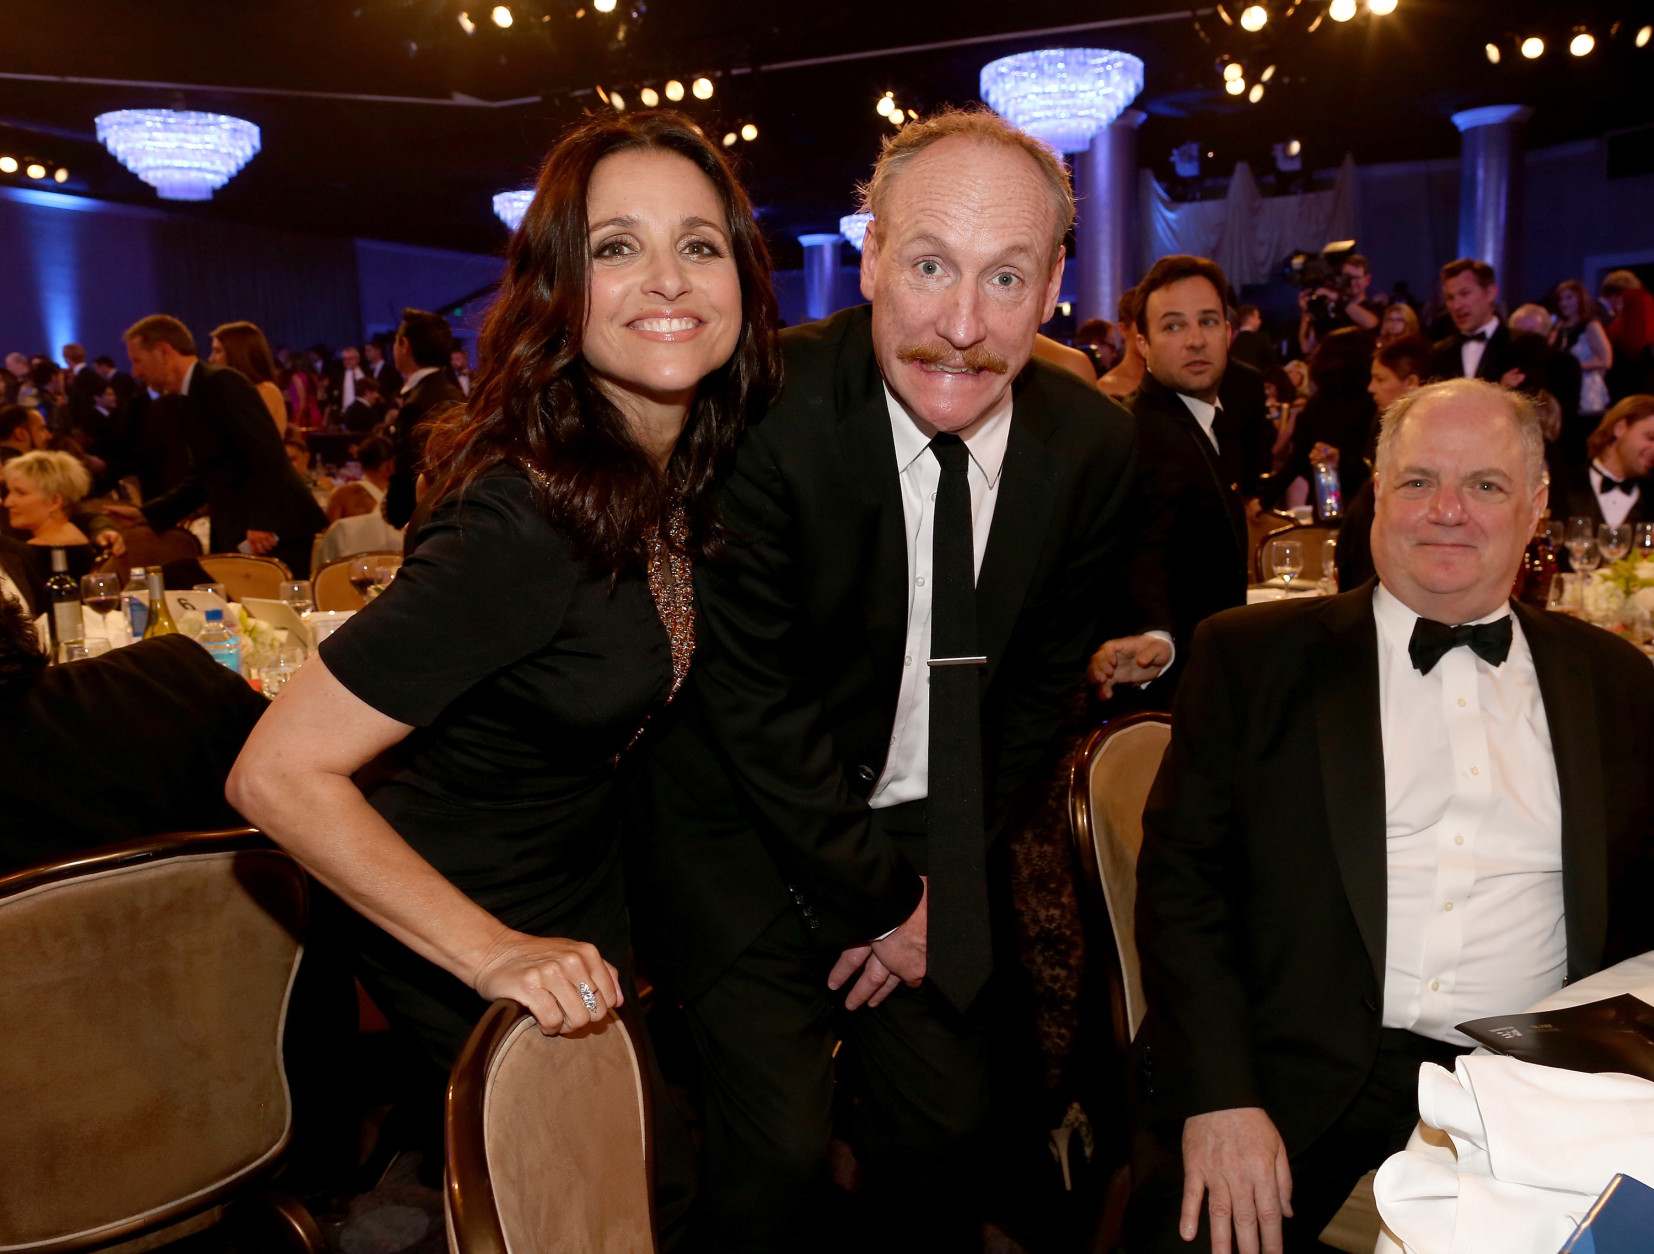 BEVERLY HILLS, CA - MAY 31:  (L-R) Actress Julia Louis-Dreyfus, actor Matt Walsh and producer/writer Frank Rich attend the 5th Annual Critics' Choice Television Awards at The Beverly Hilton Hotel on May 31, 2015 in Beverly Hills, California.  (Photo by Christopher Polk/Getty Images for Critics' Choice Television Awards)